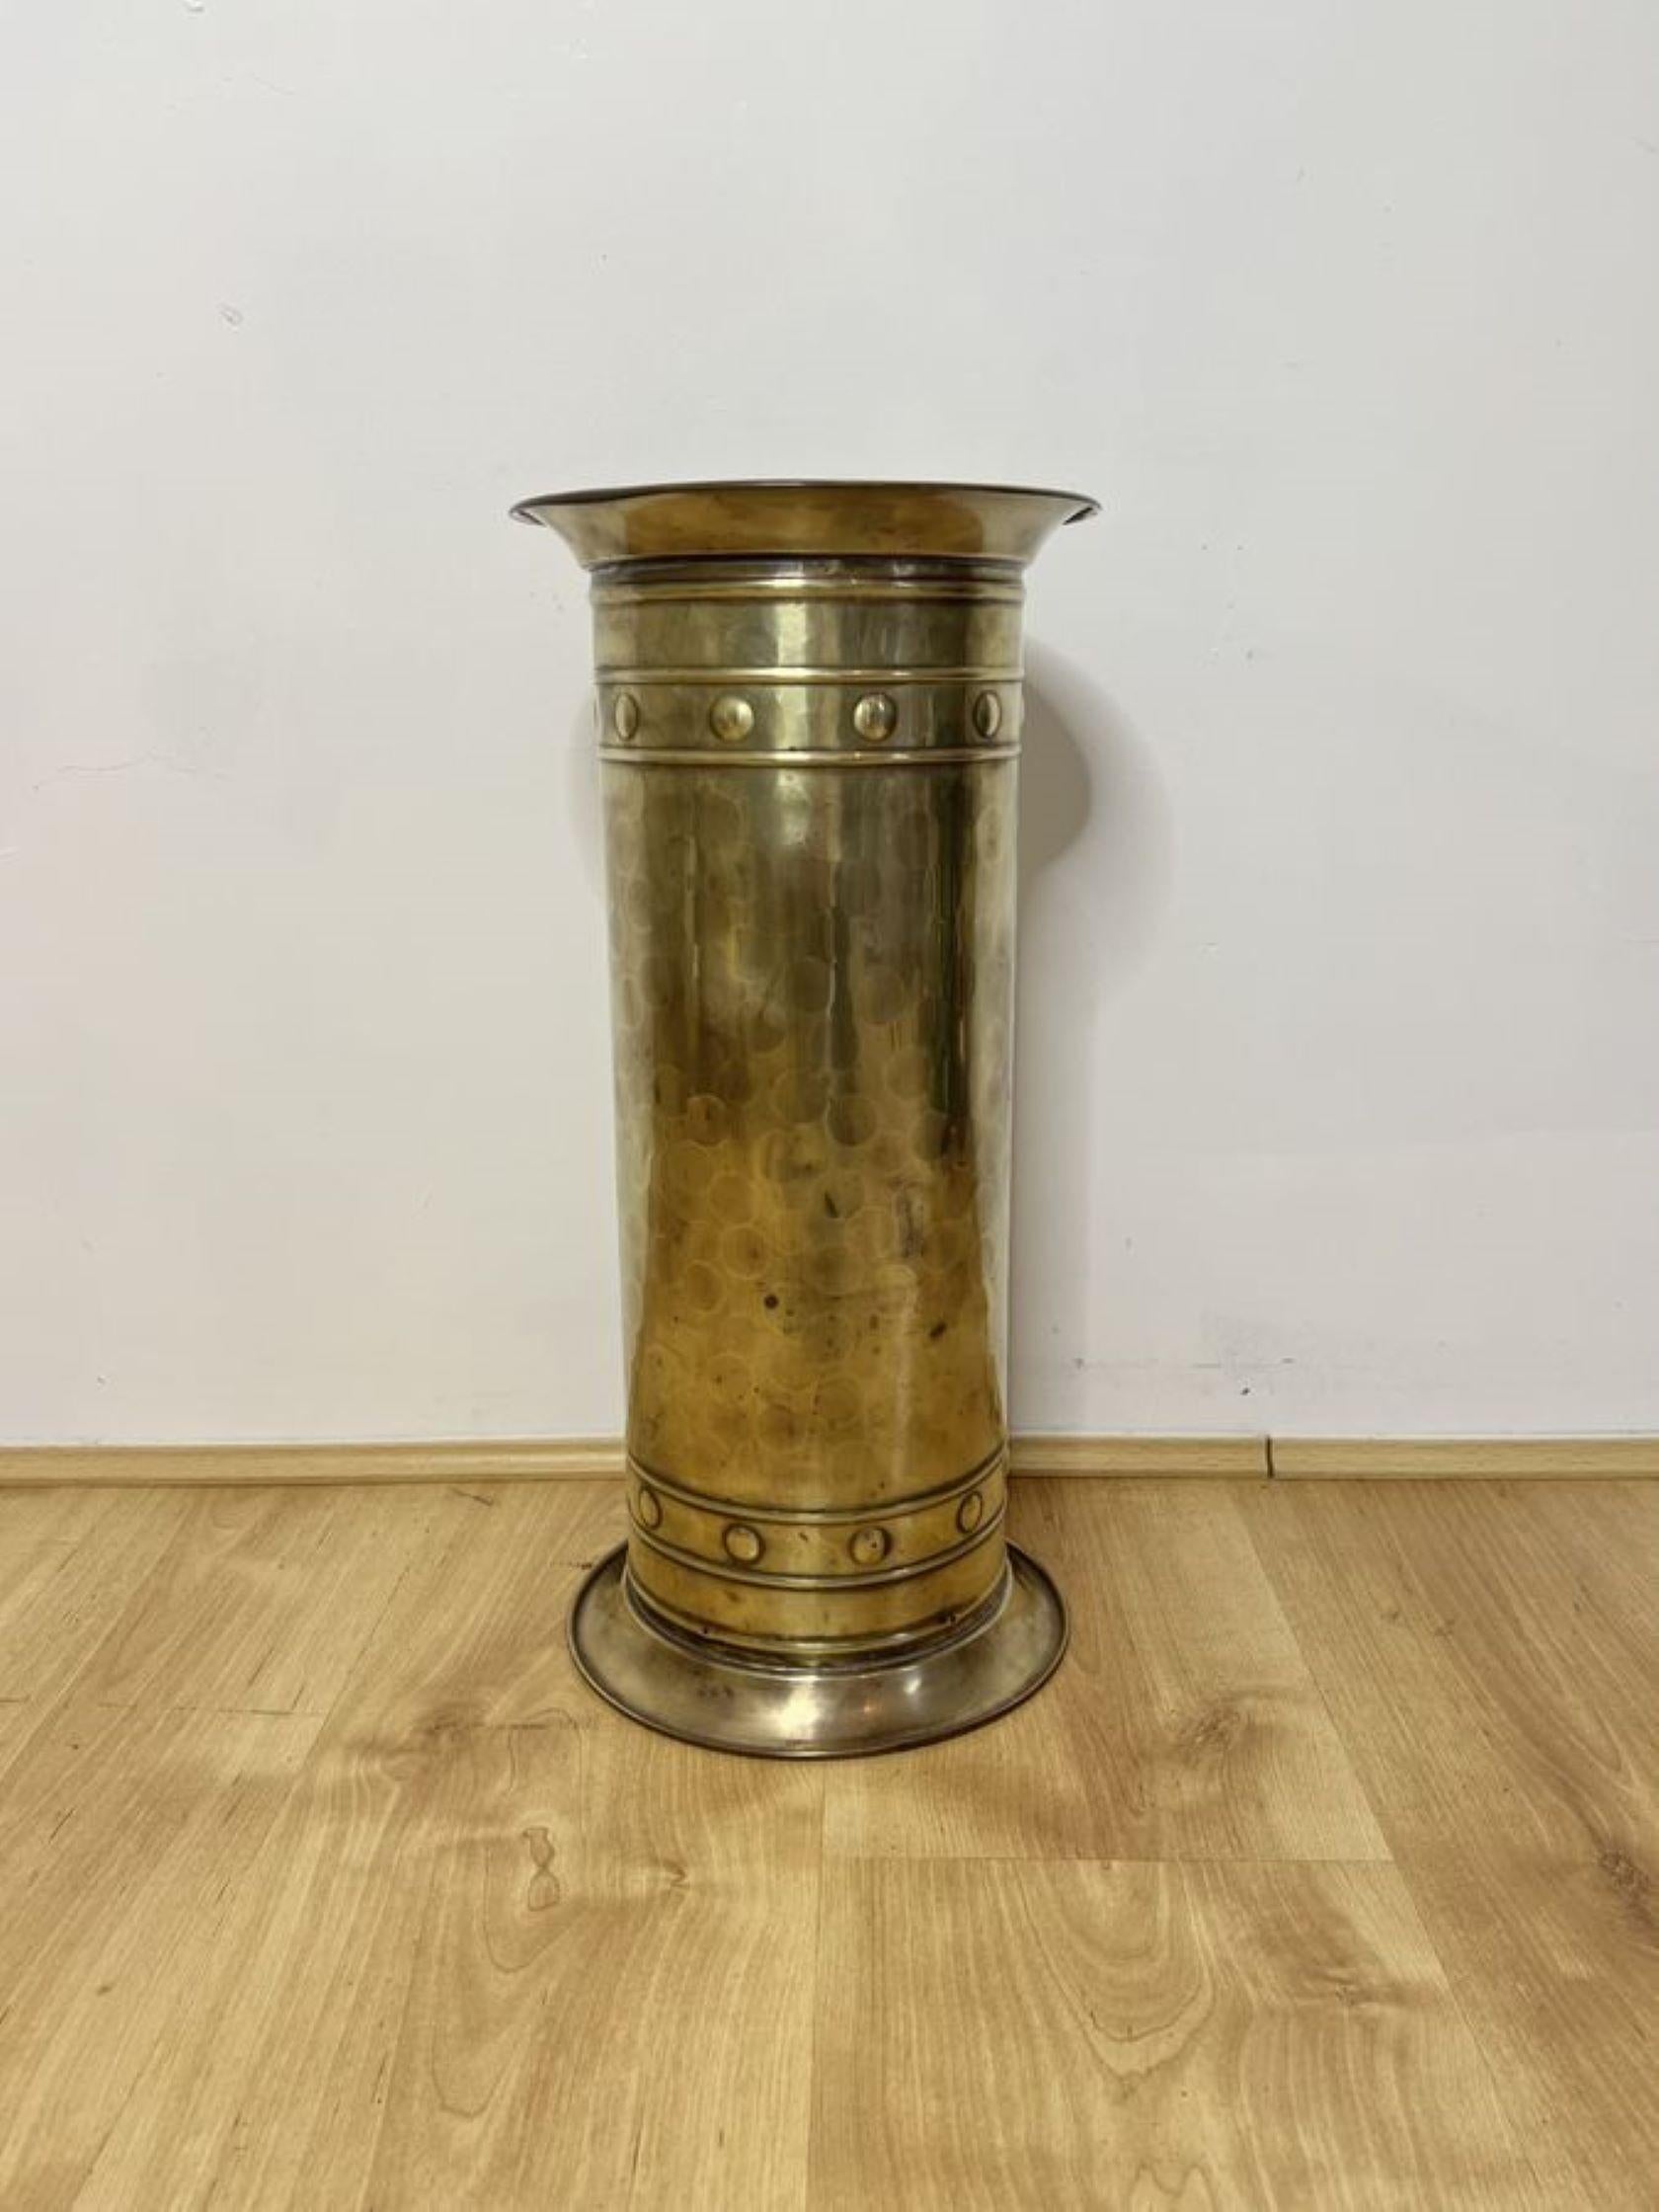 Lovely antique Edwardian brass stick stand having a quality antique Edwardian circular shaped antique brass stick stand.

D. 1900